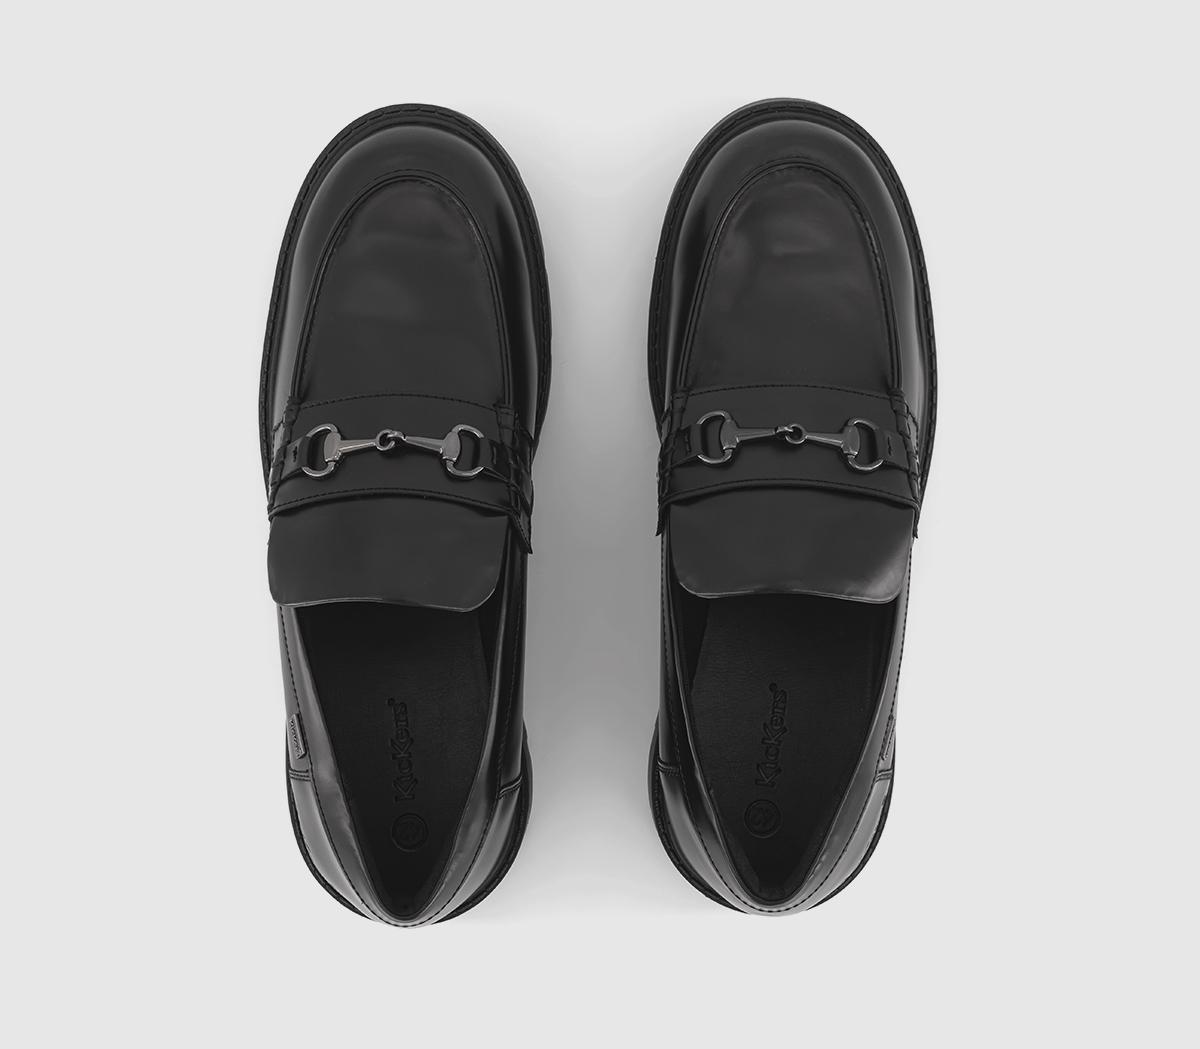 Kickers Kori Charm Loafers Black Leather - School Shoes and Accessories